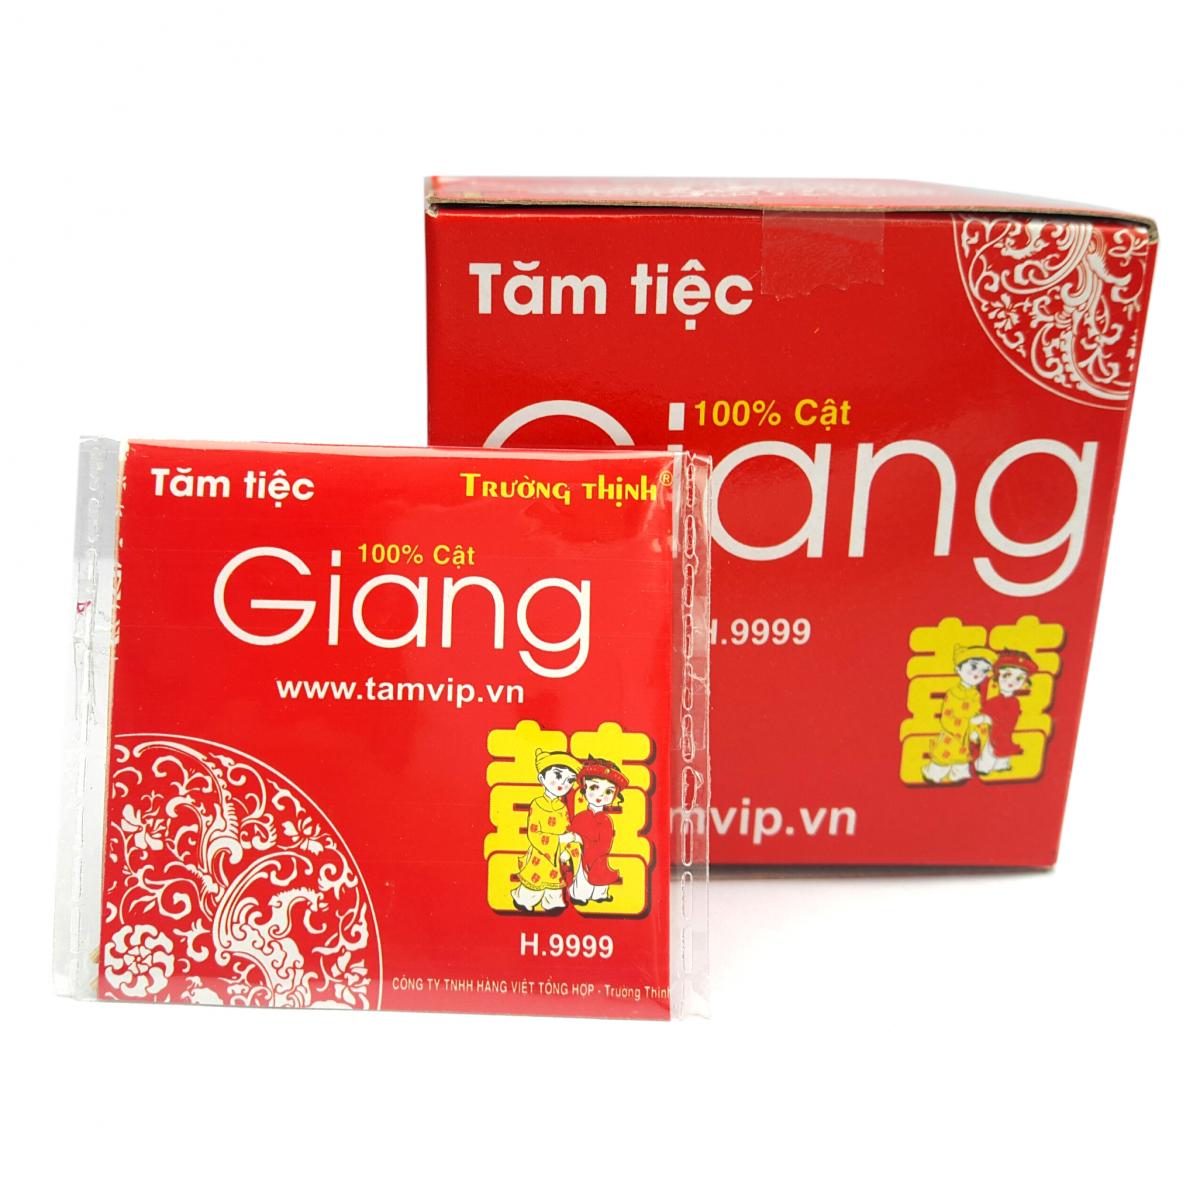 Hỷ giang 9999